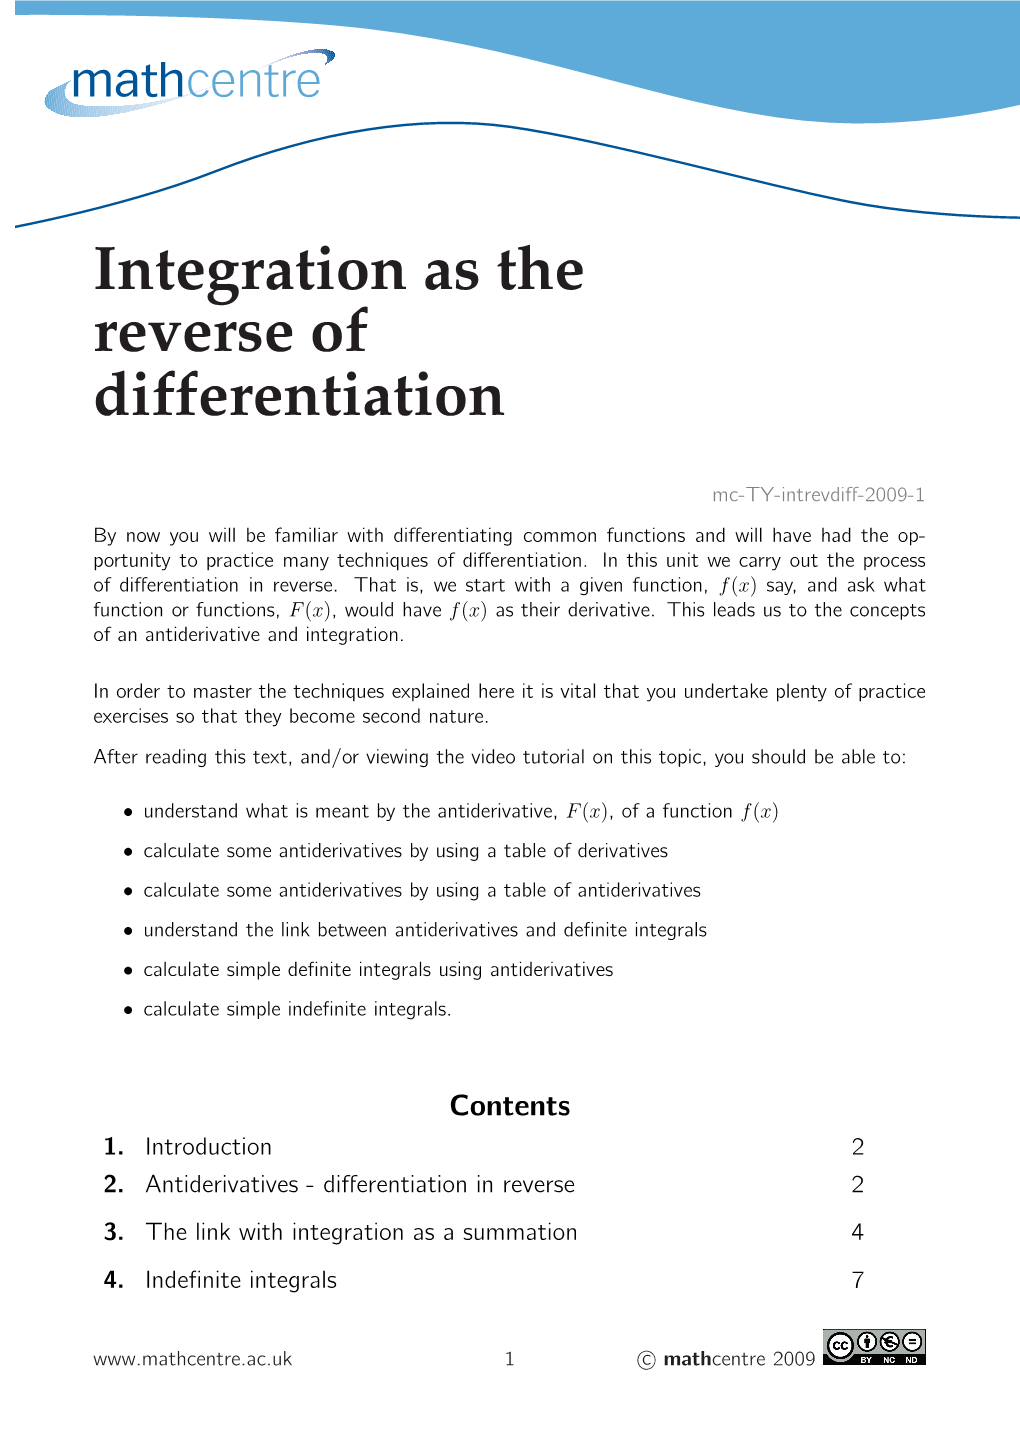 Integration As the Reverse of Differentiation